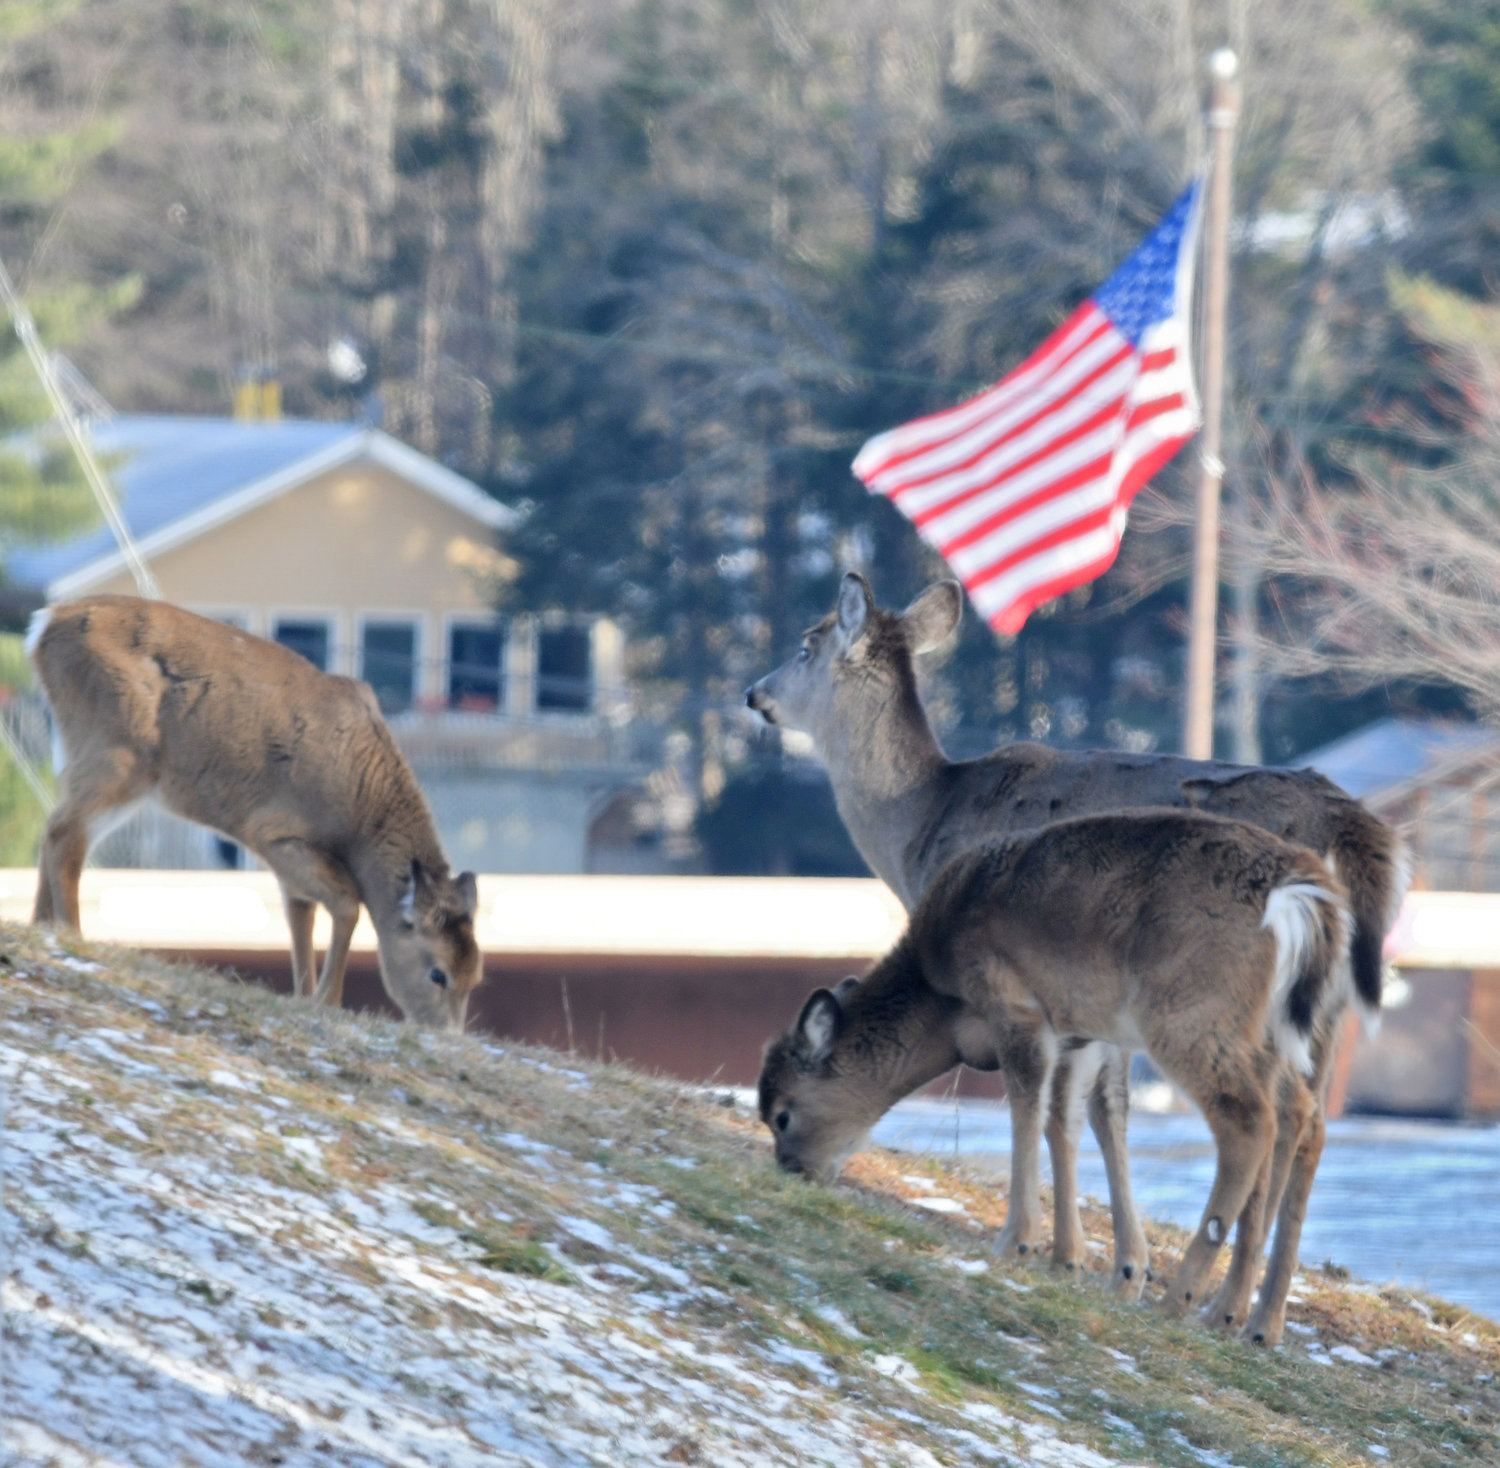 PATRIOTIC DEER — A trio of deer much on an open grassy area with a flag nearby in the village of Old Forge Wednesday afternoon.